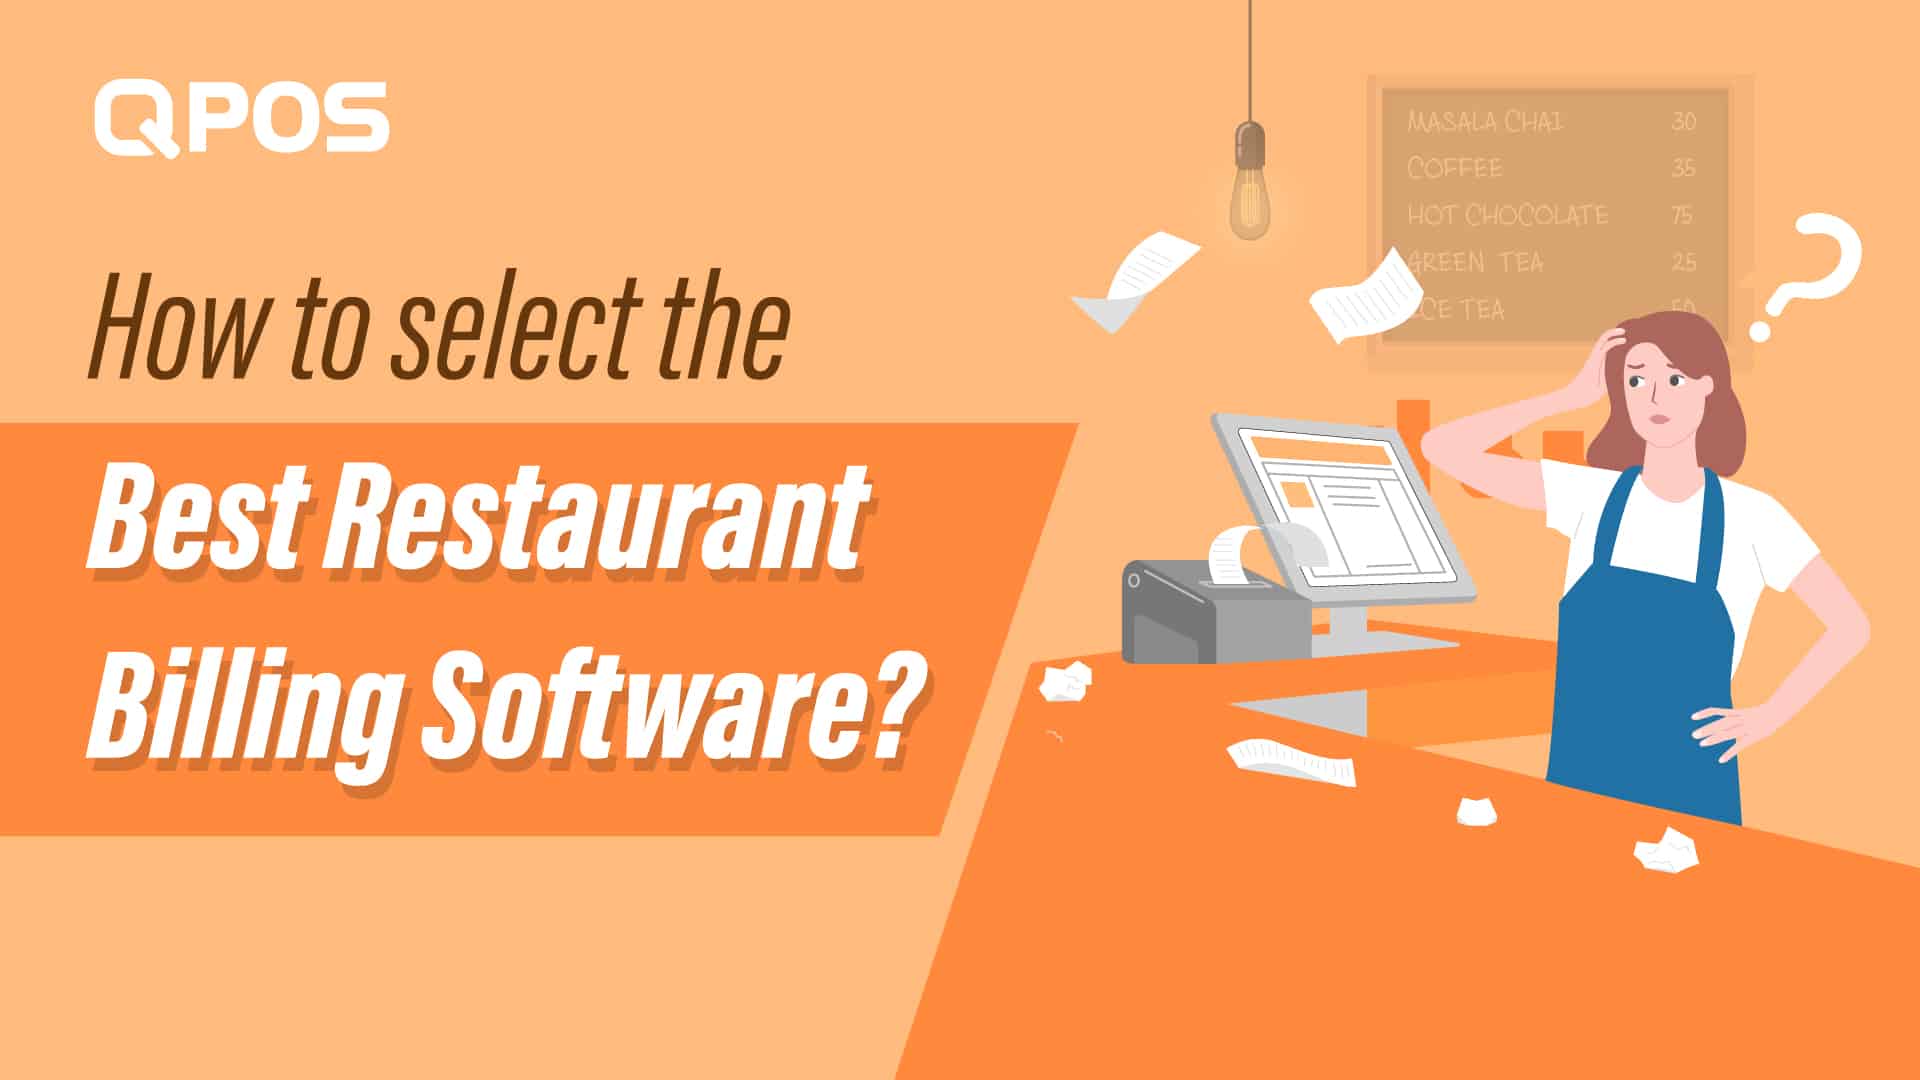 A Guide to Selecting the Best Restaurant Billing Software